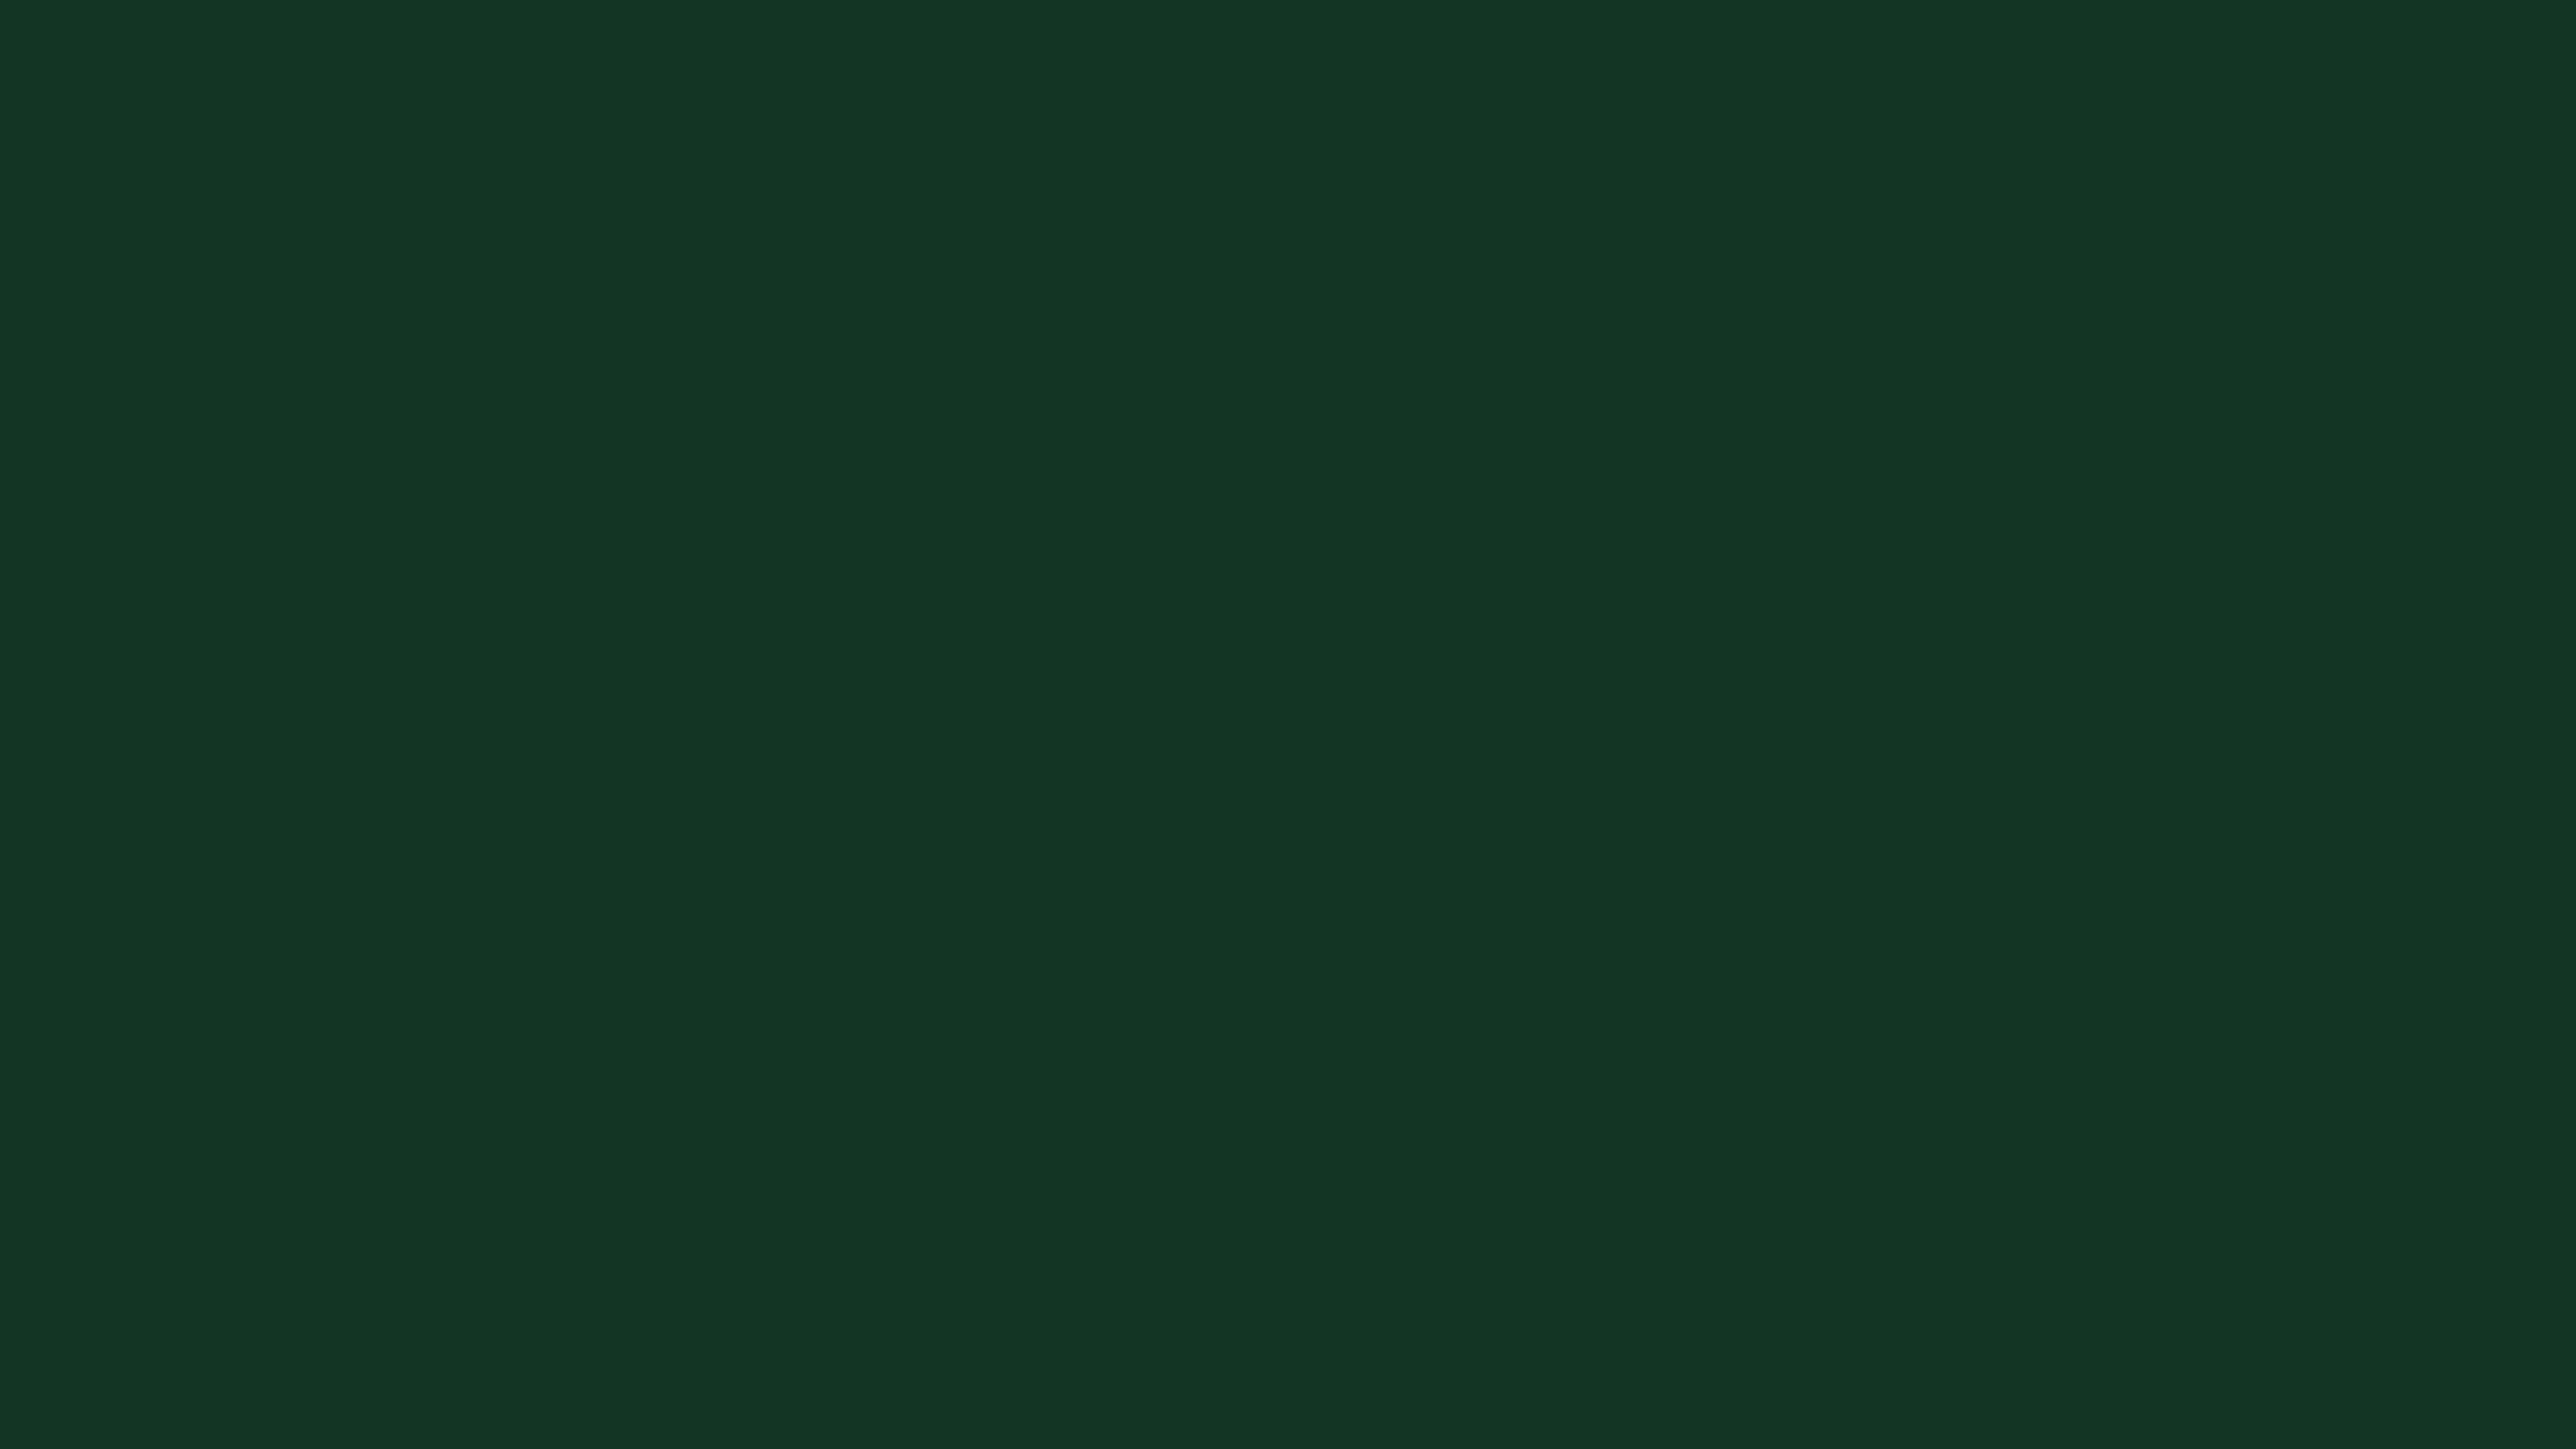 5120x2880 Phthalo Green Solid Color Background